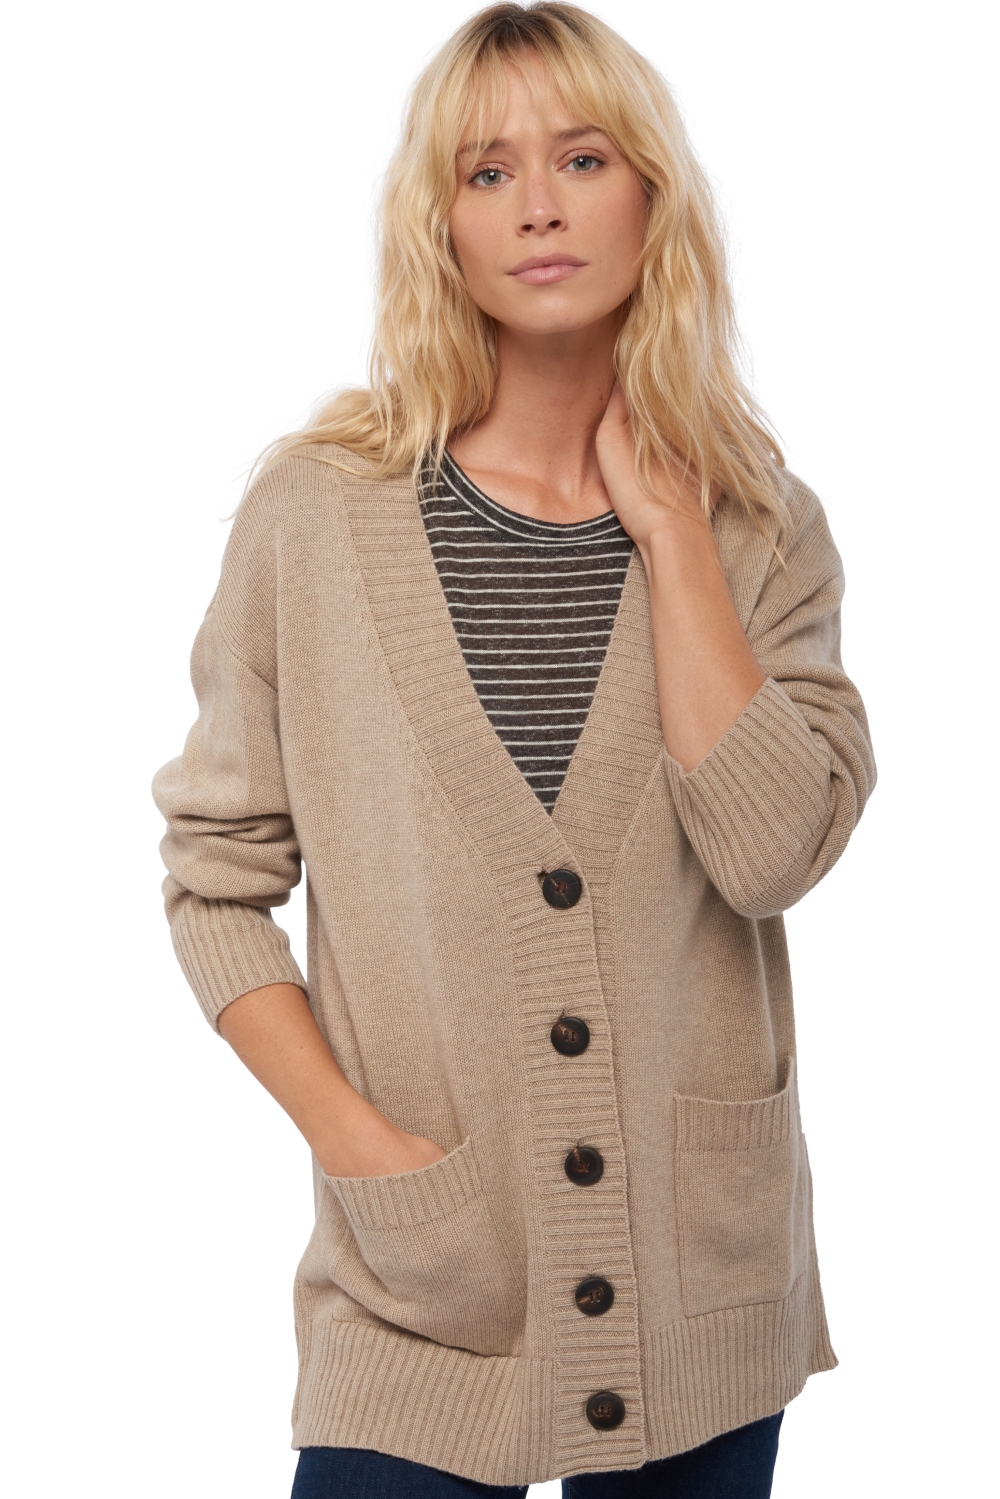 Cachemire pull femme vadena natural stone 3xl